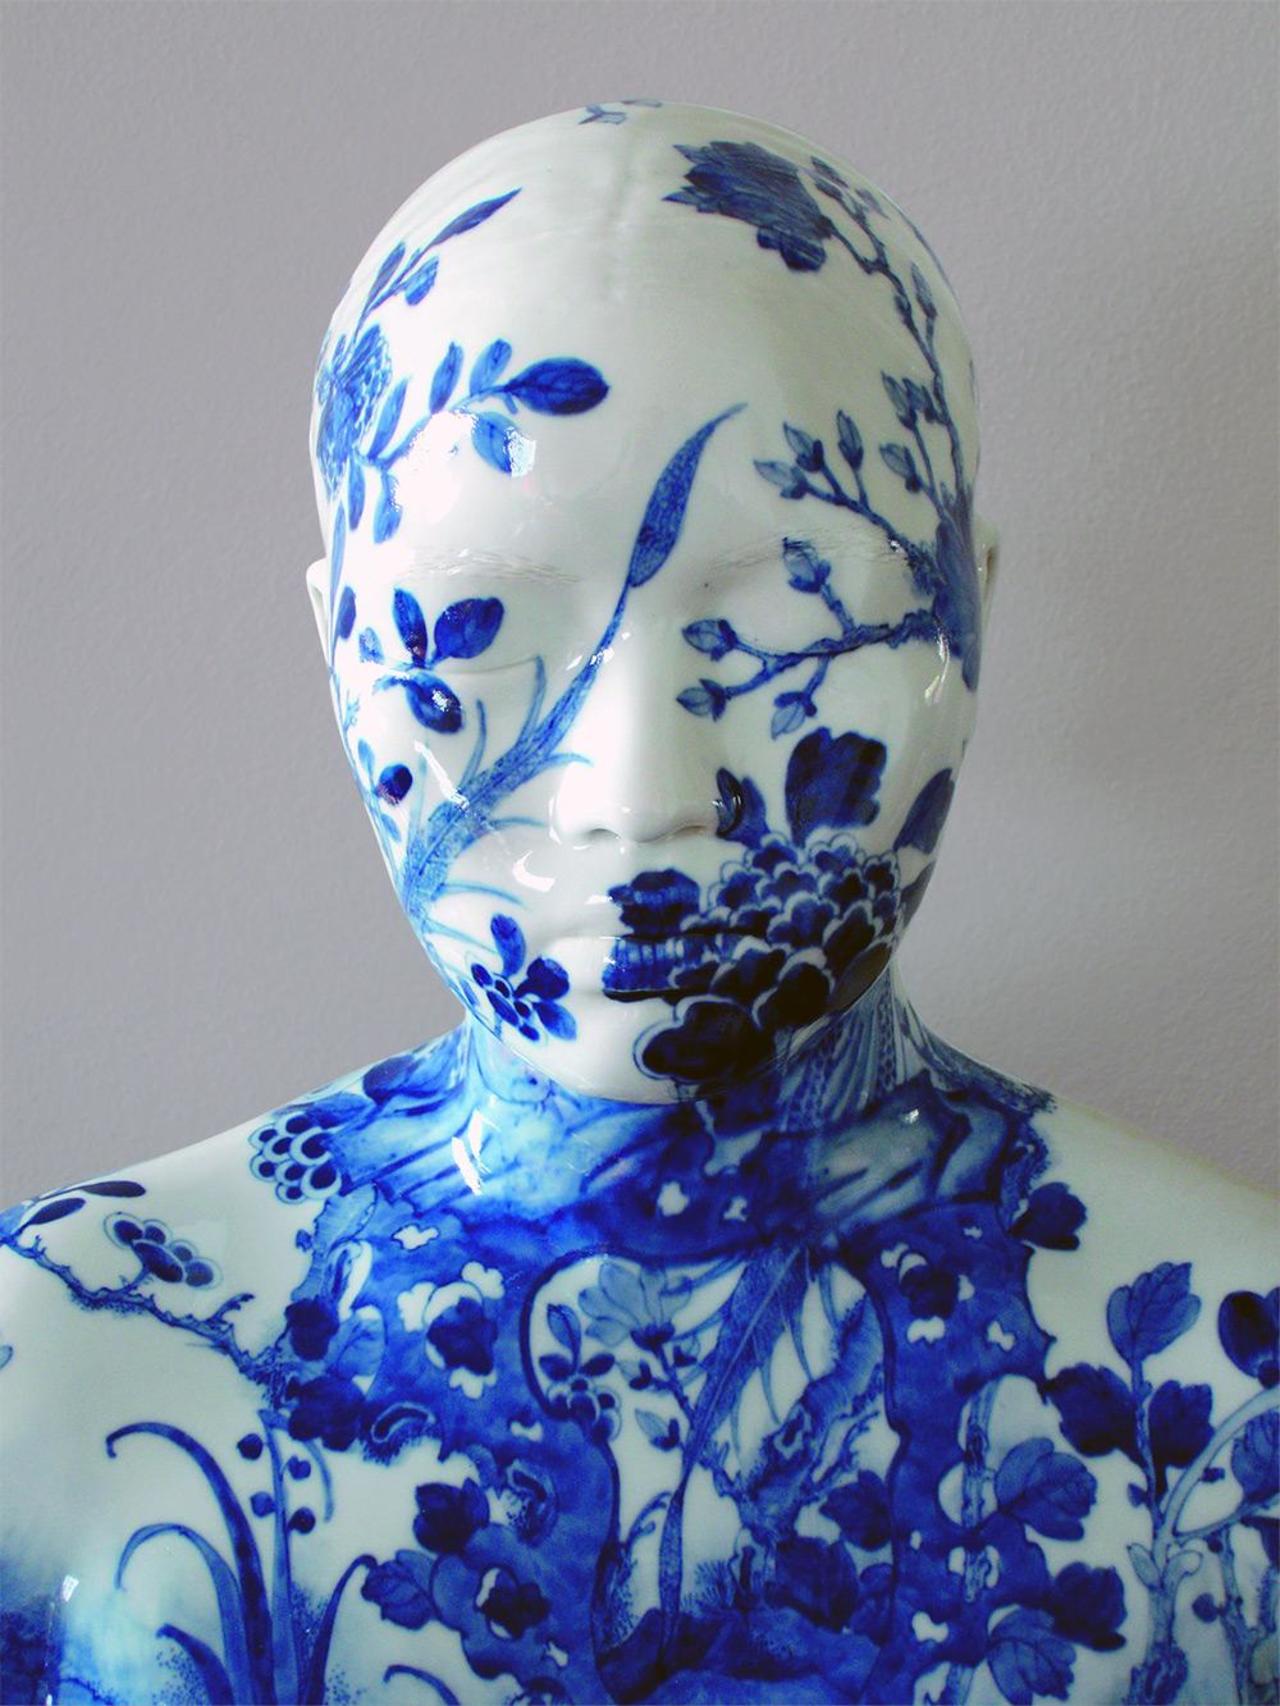 Porcelain Busts Imprinted with Chinese Decorative Designs by... via @colossal http://zoot.li/7m0u #art #ceramics http://t.co/d7tfpMOBOY